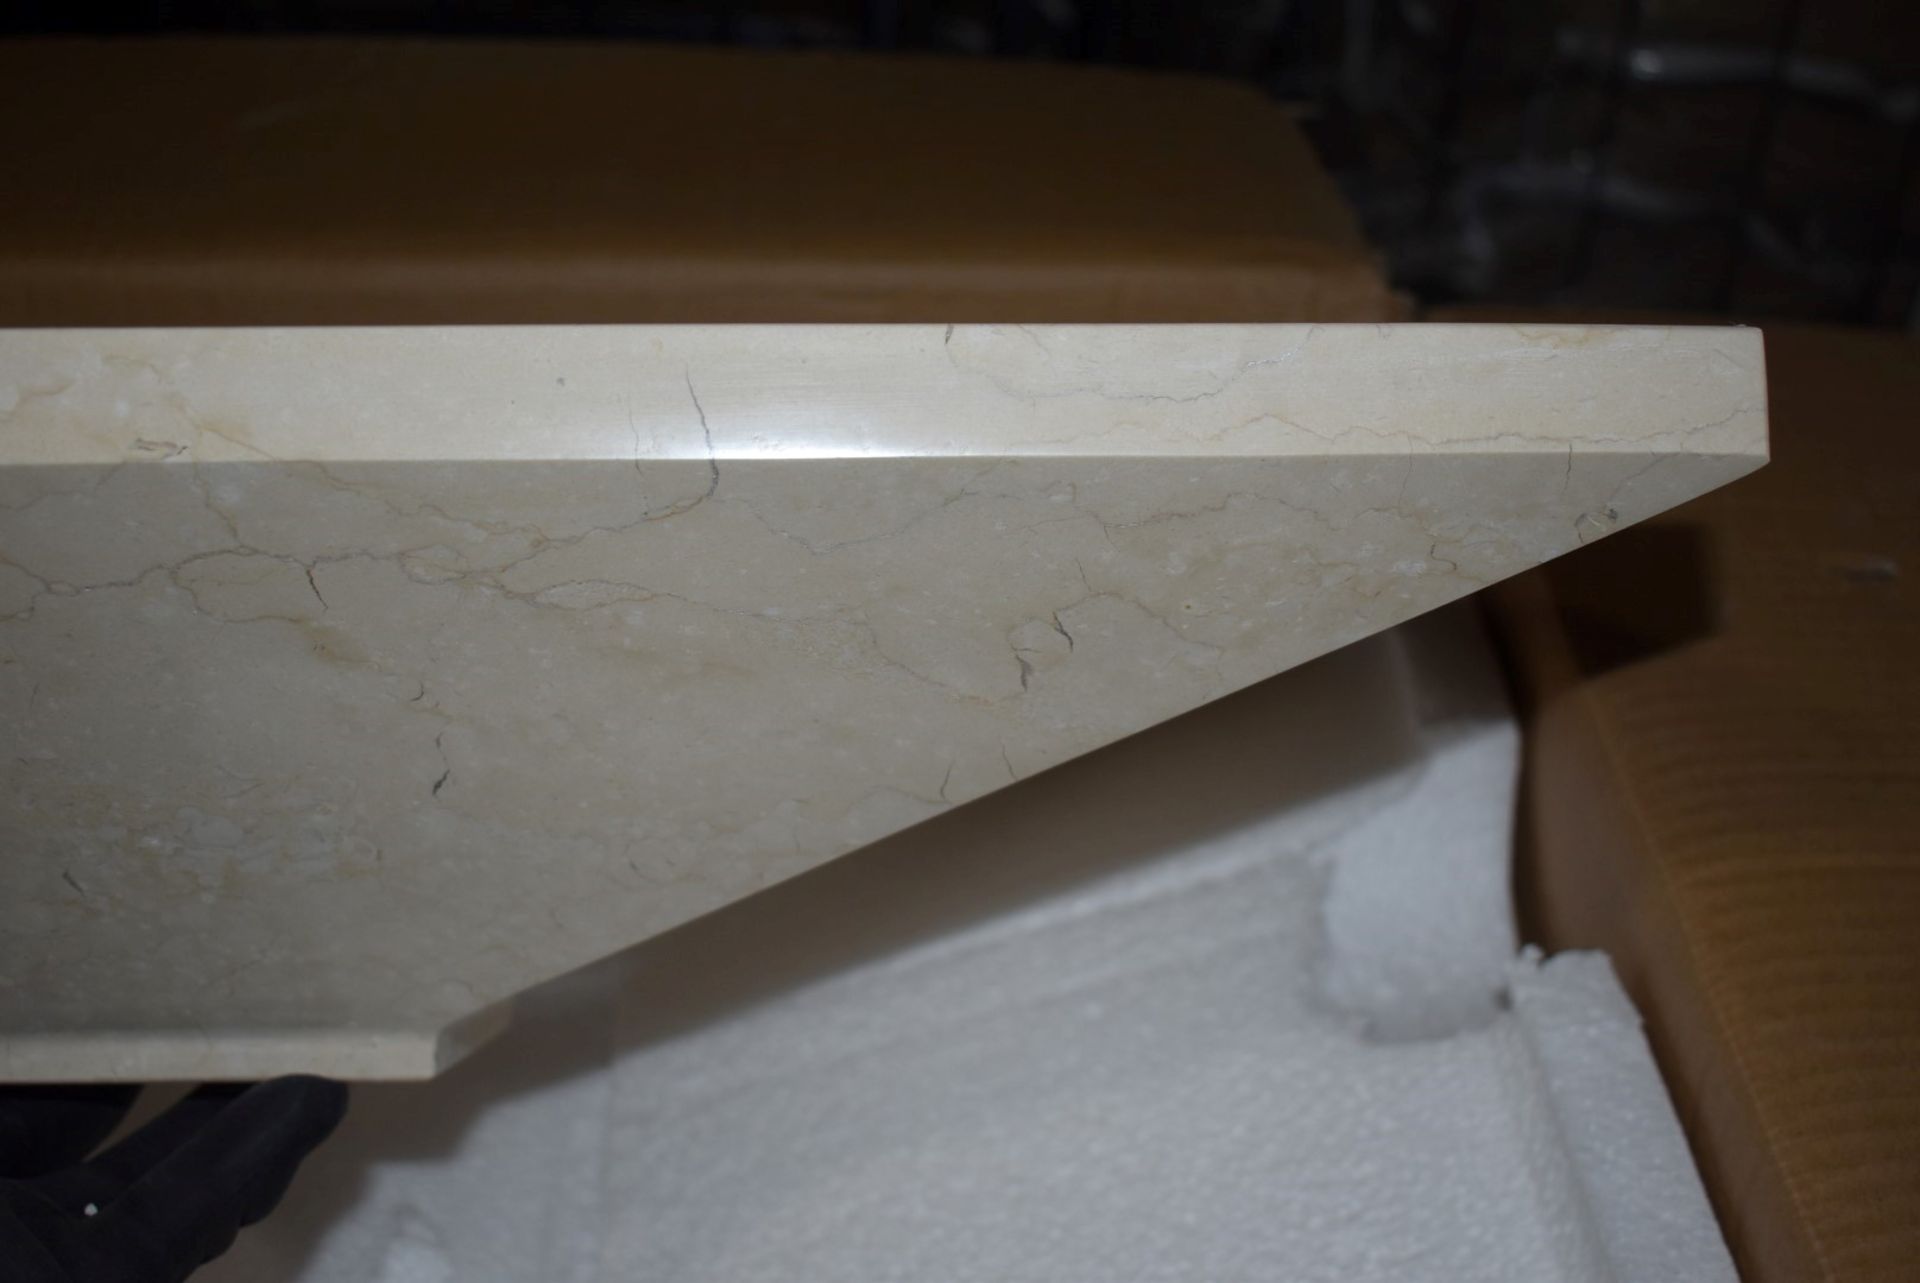 1 x Stonearth 'Karo' Solid Galala Marble Stone Countertop Sink Basin - New Boxed Stock - Image 6 of 8